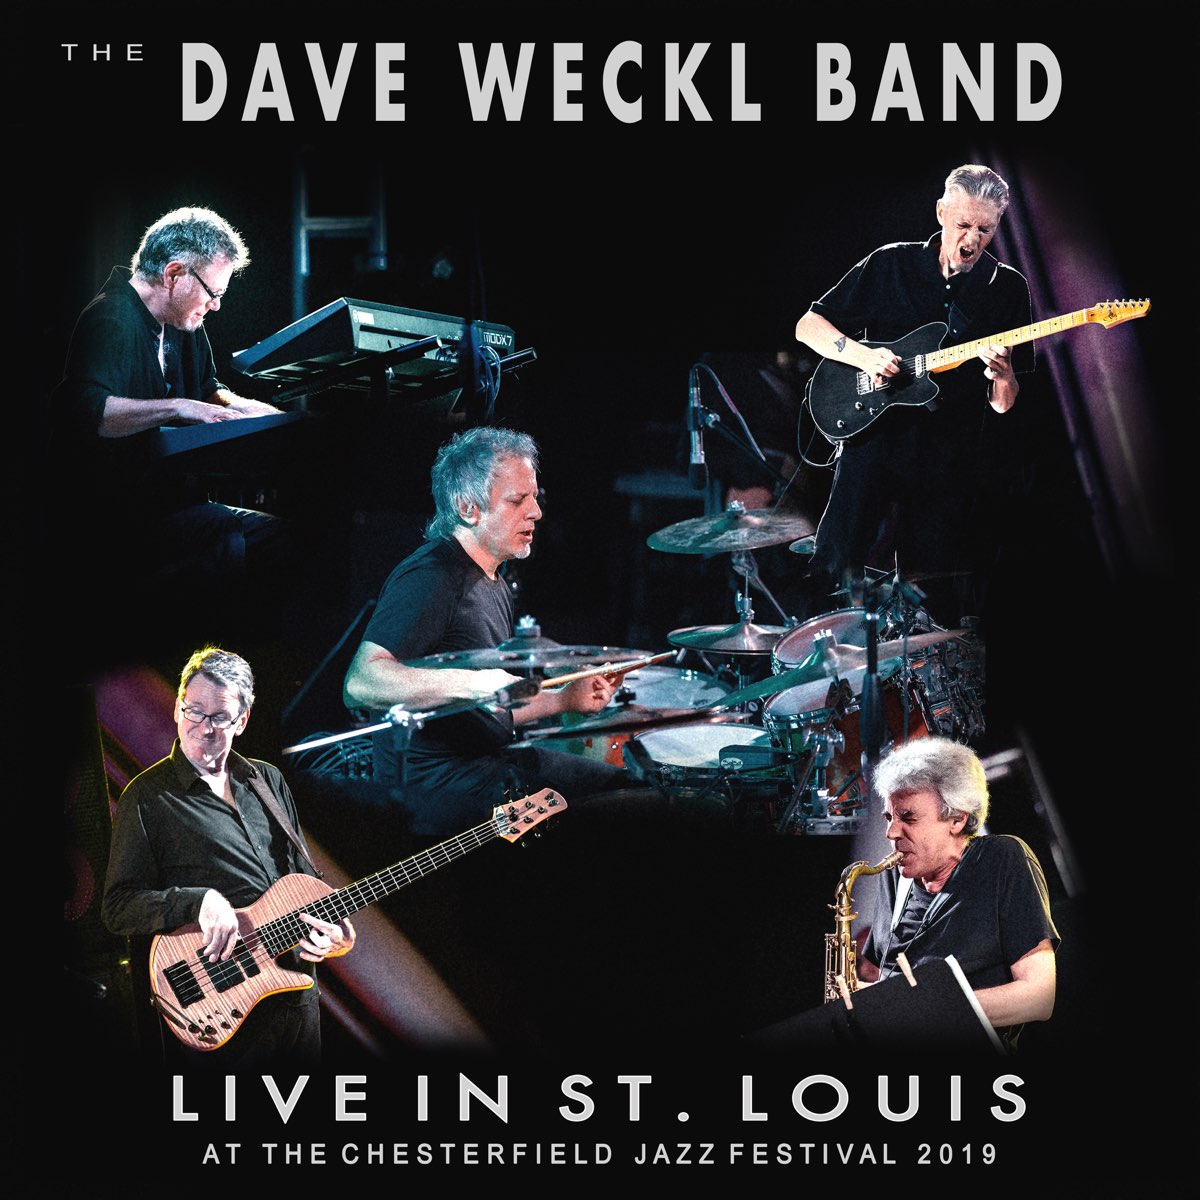 Live in St. Louis at the Chesterfield Jazz Festival 2019 by The Dave Weckl  Band on Apple Music